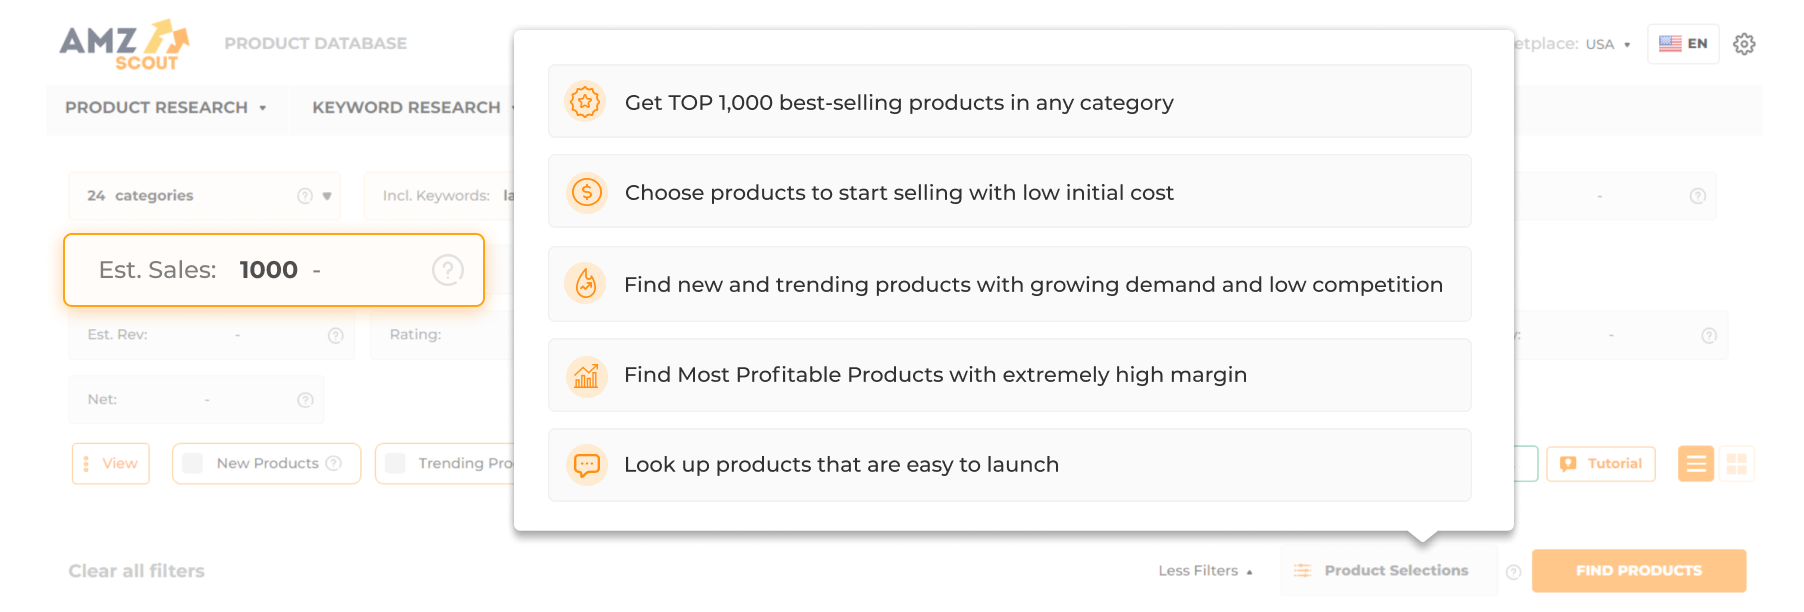 The Ultimate List of the Top Best-Selling Product Categories on